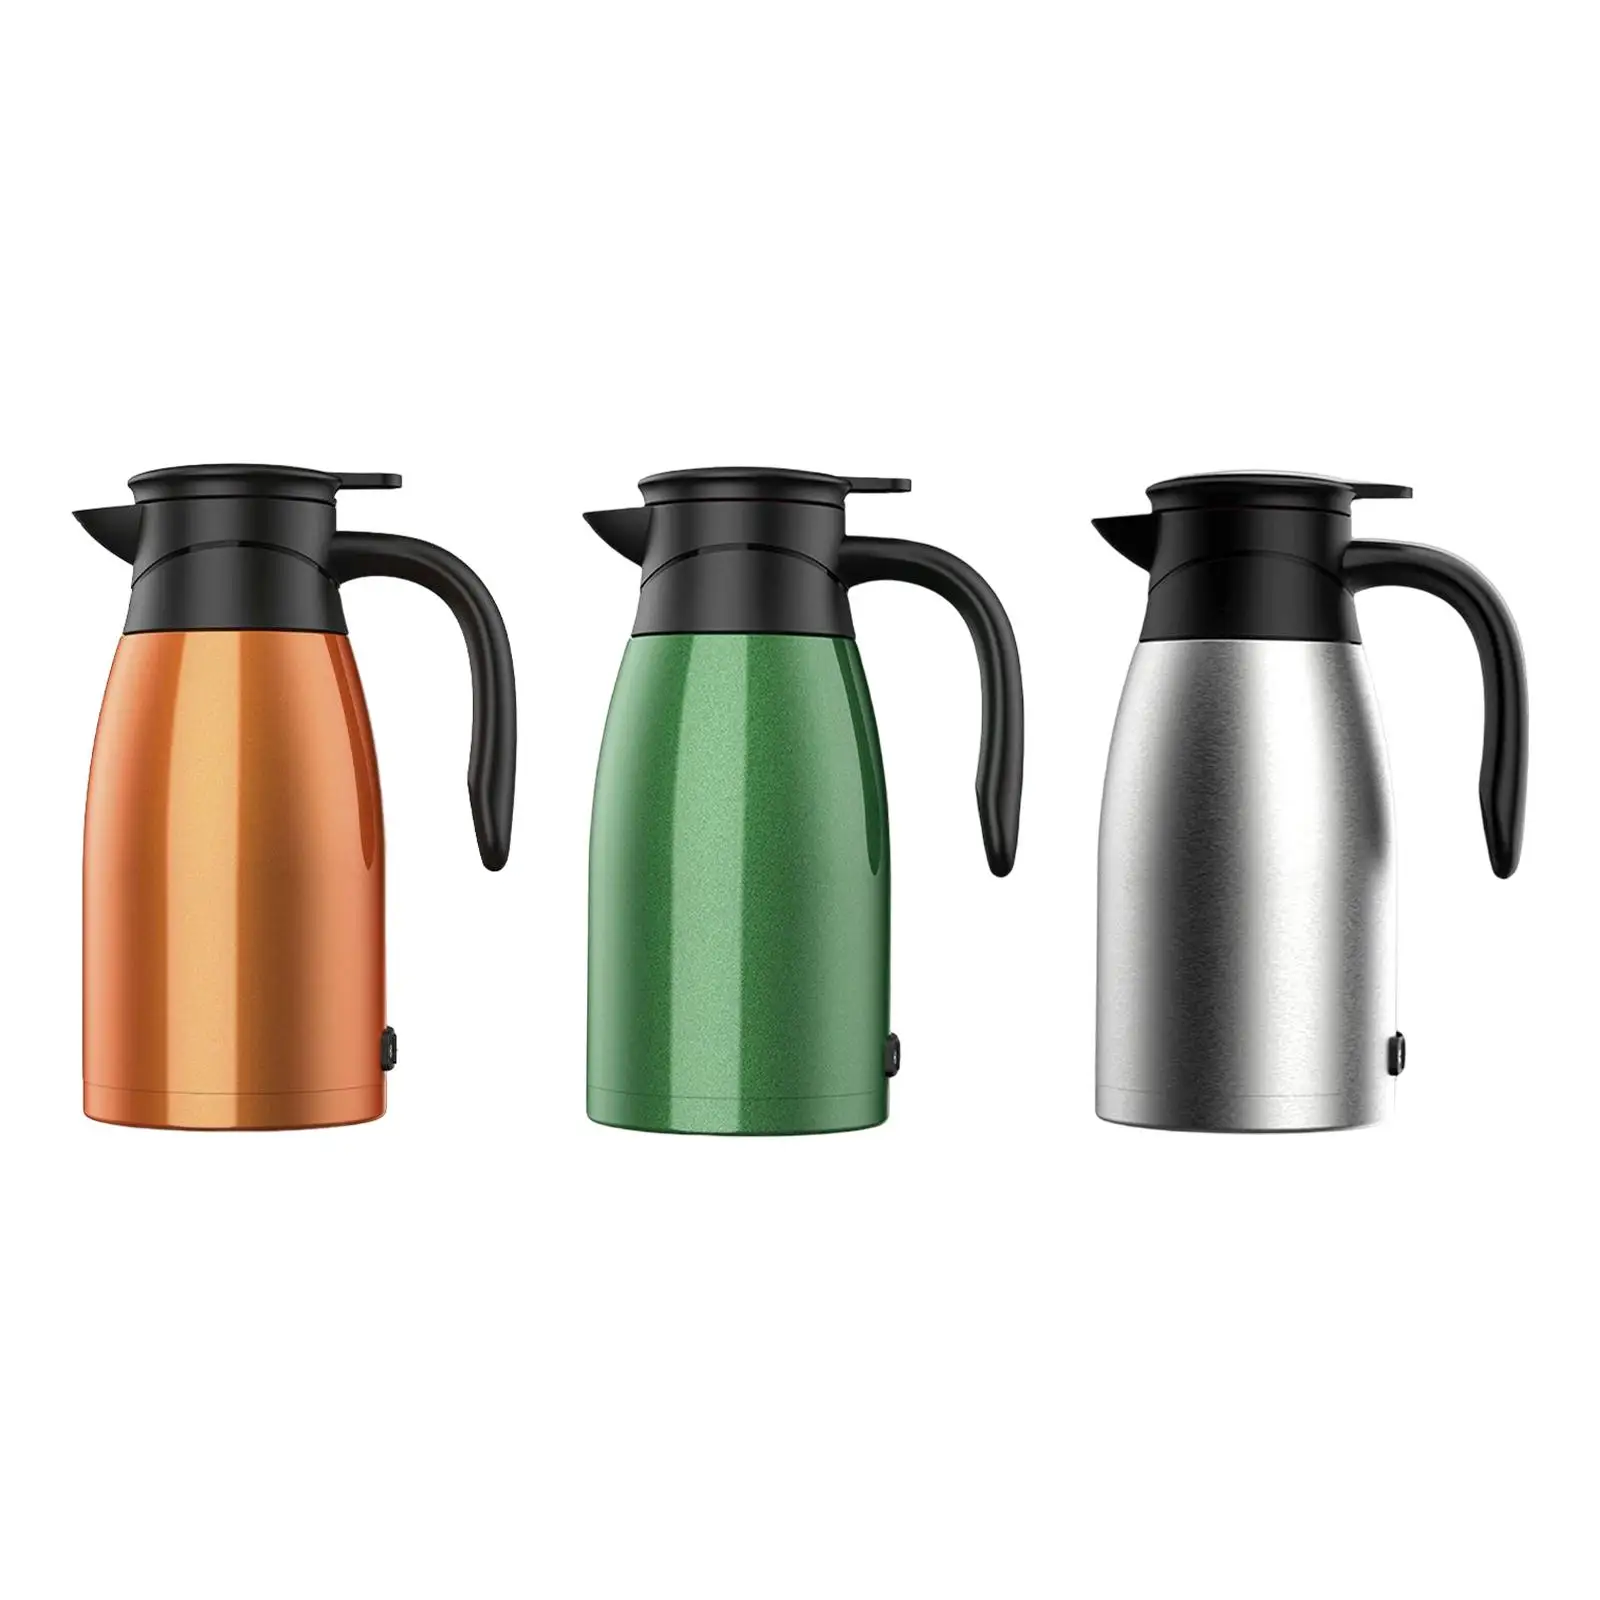 Portable 24V Car Truck Kettle Boiler Warmer Temp Display Hot Water Kettle Heating Cup for Tea Coffee Milk Water Travel